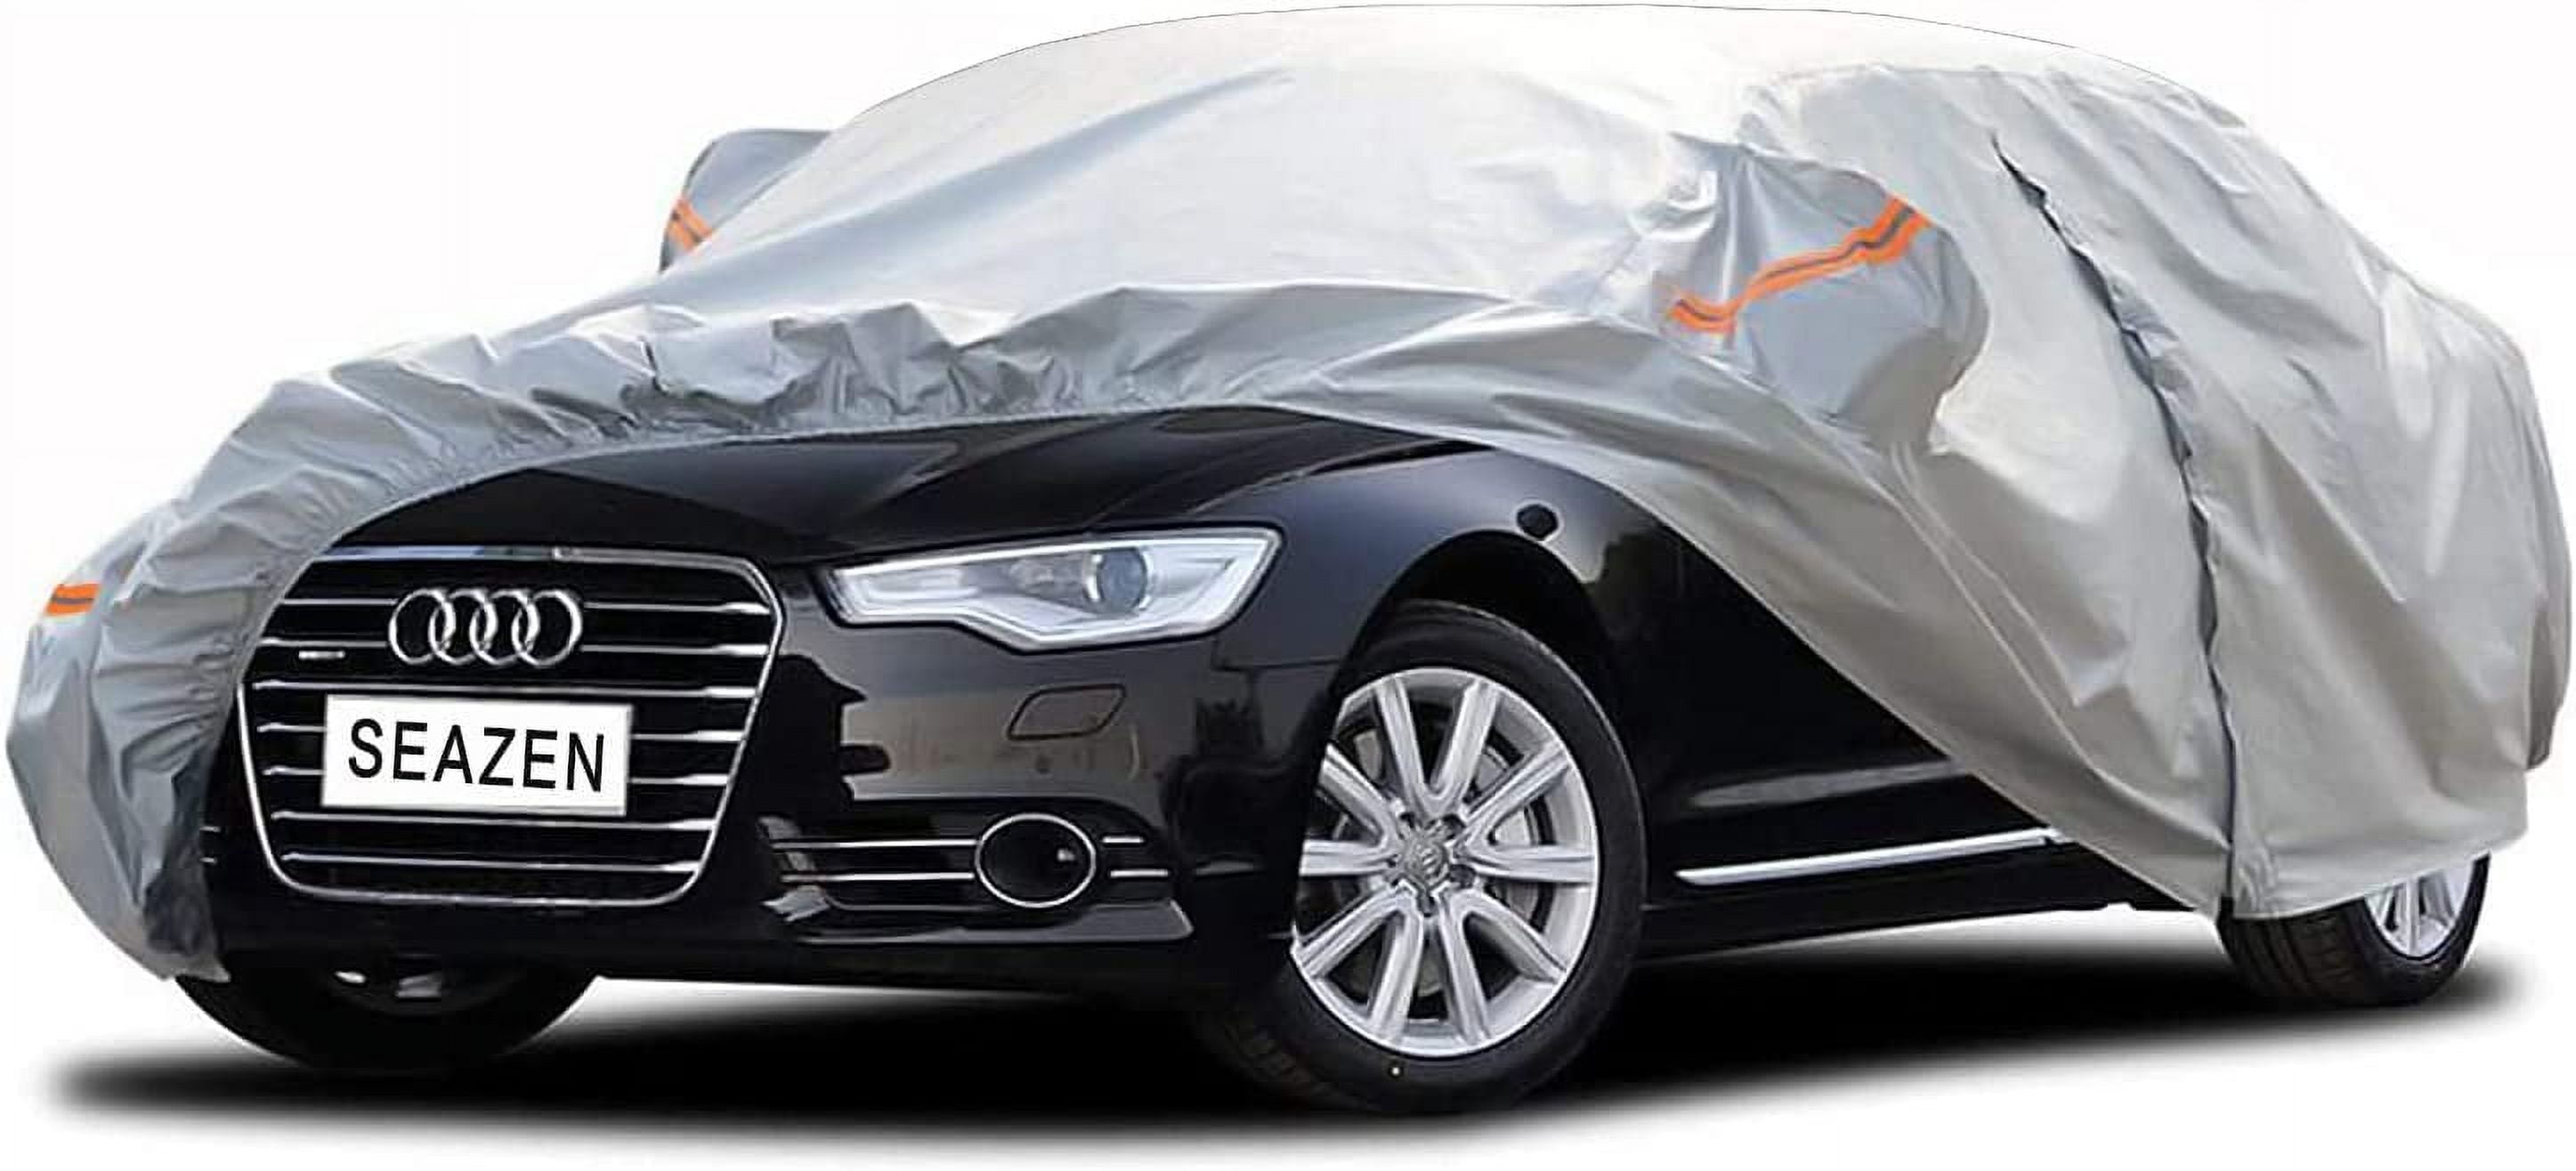 Allweather Perfect Gray Car Cover UV Waterproof Outdoor for Citroen C2